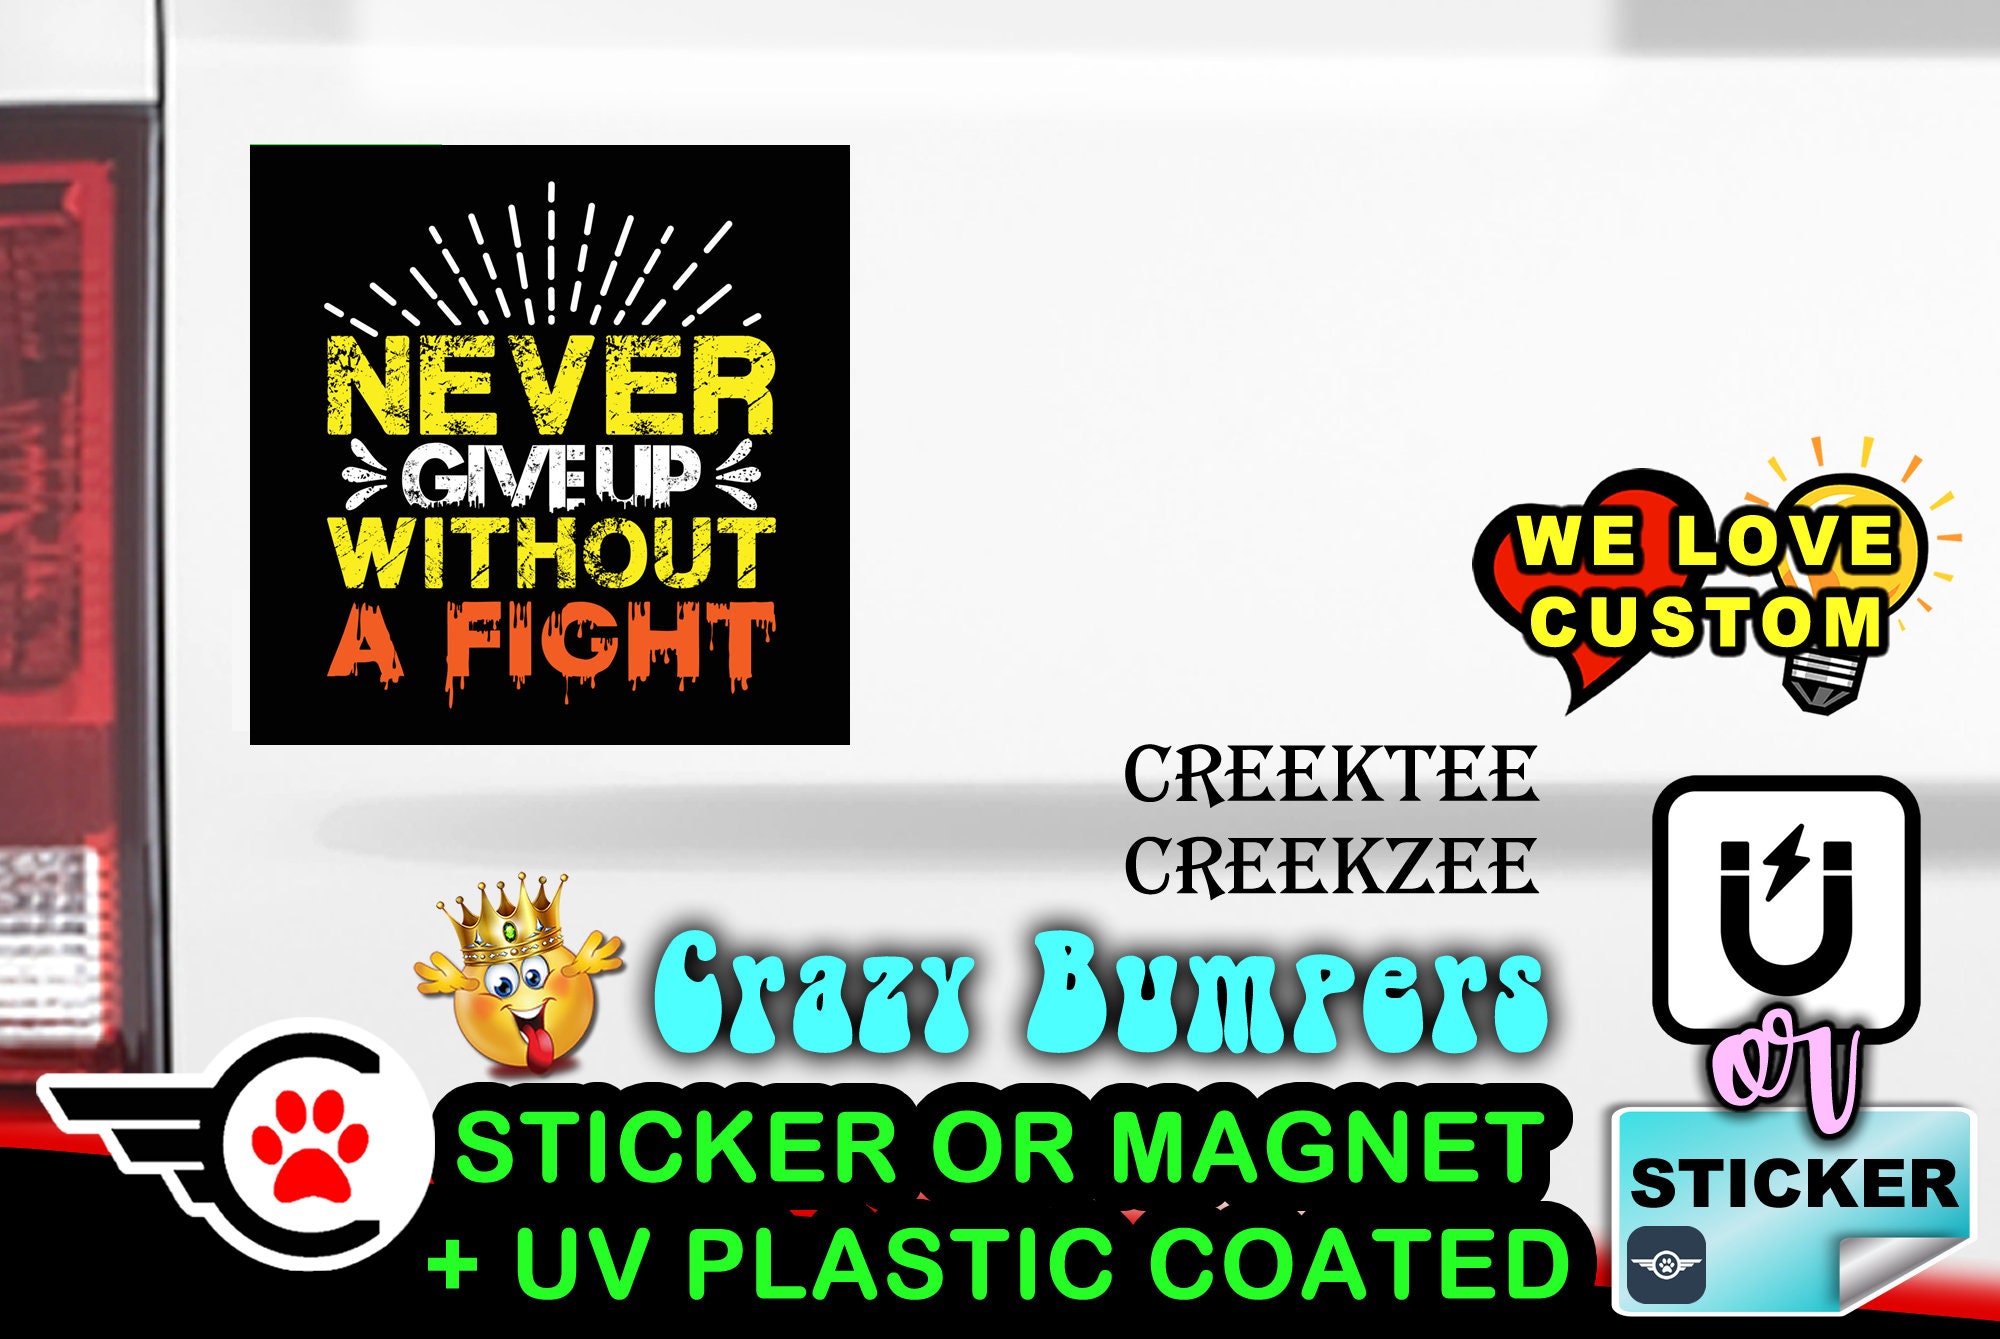 Never Give Up Without A Fight Bumper Sticker or Magnet in various sizes Hiqh Quality UV Laminate Coating 2